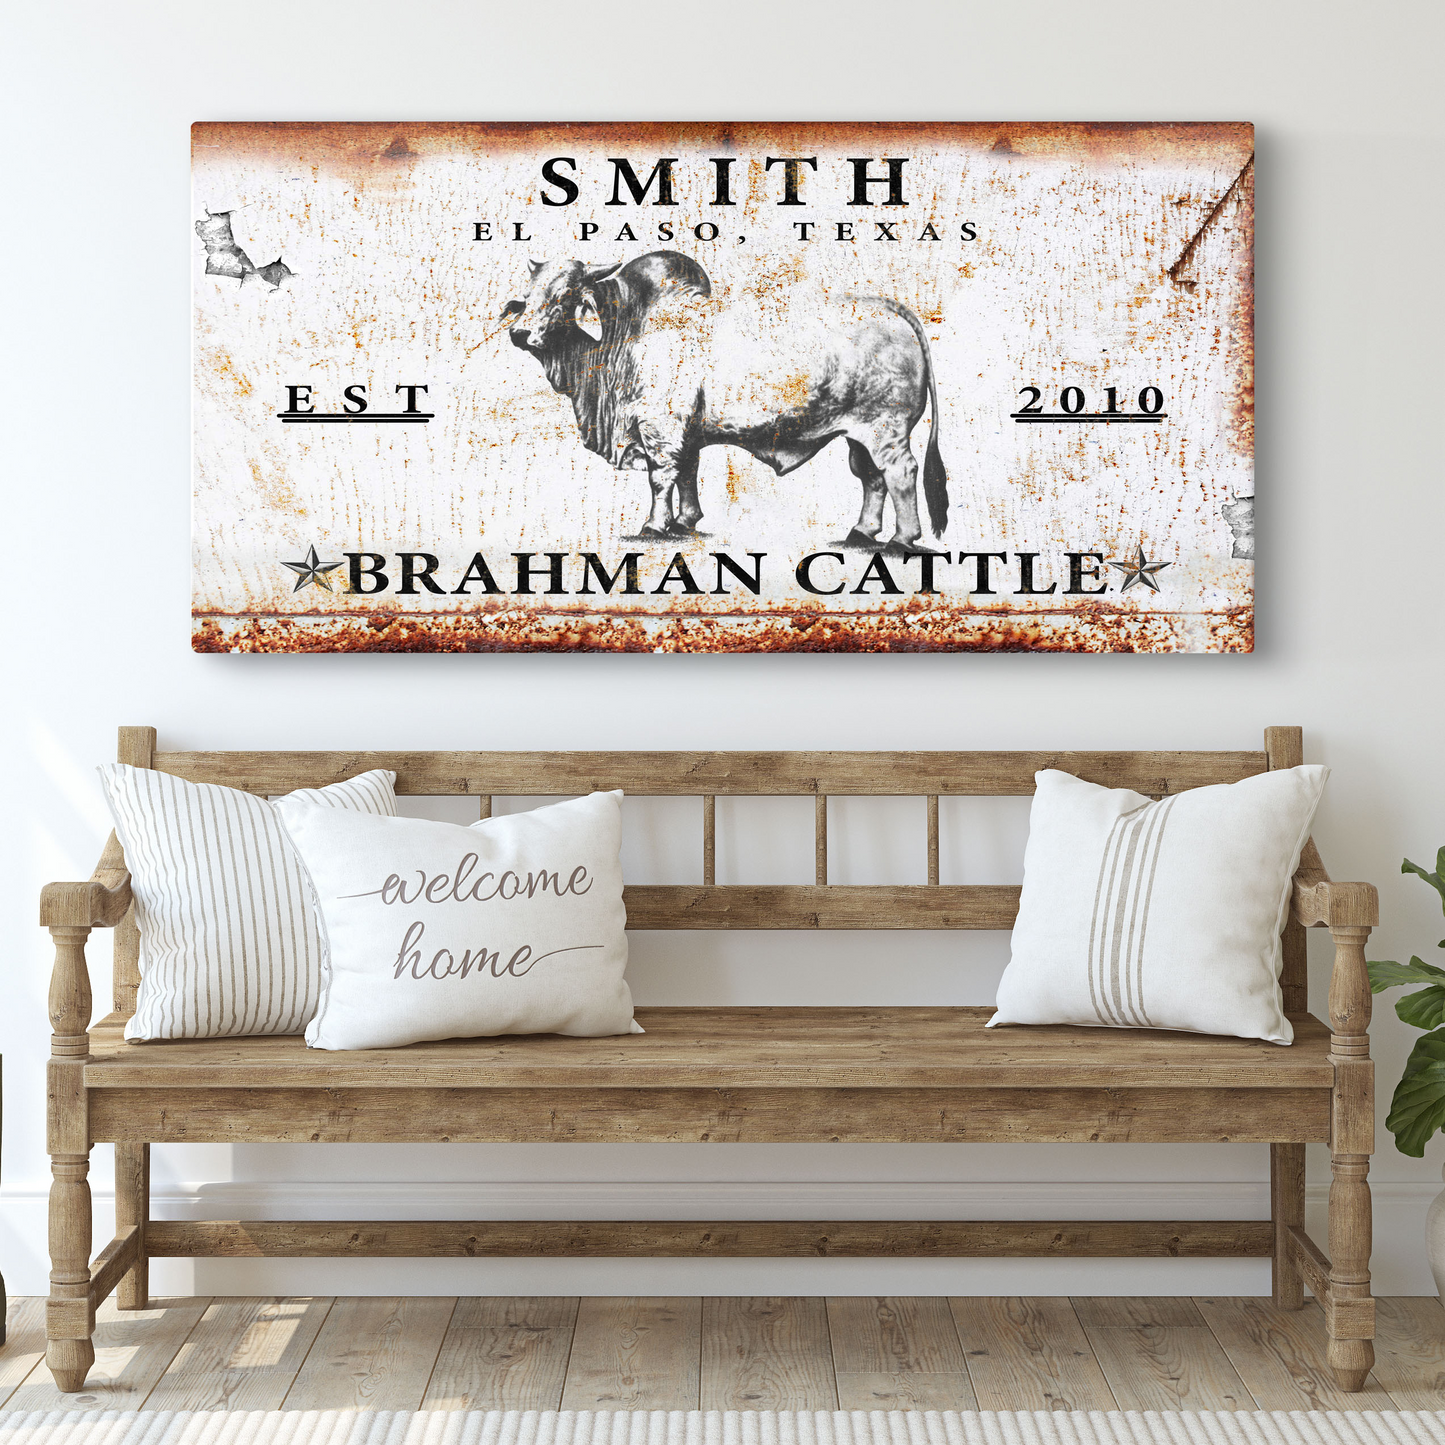 Brahman Cattle Sign Style 2 - Image by Tailored Canvases